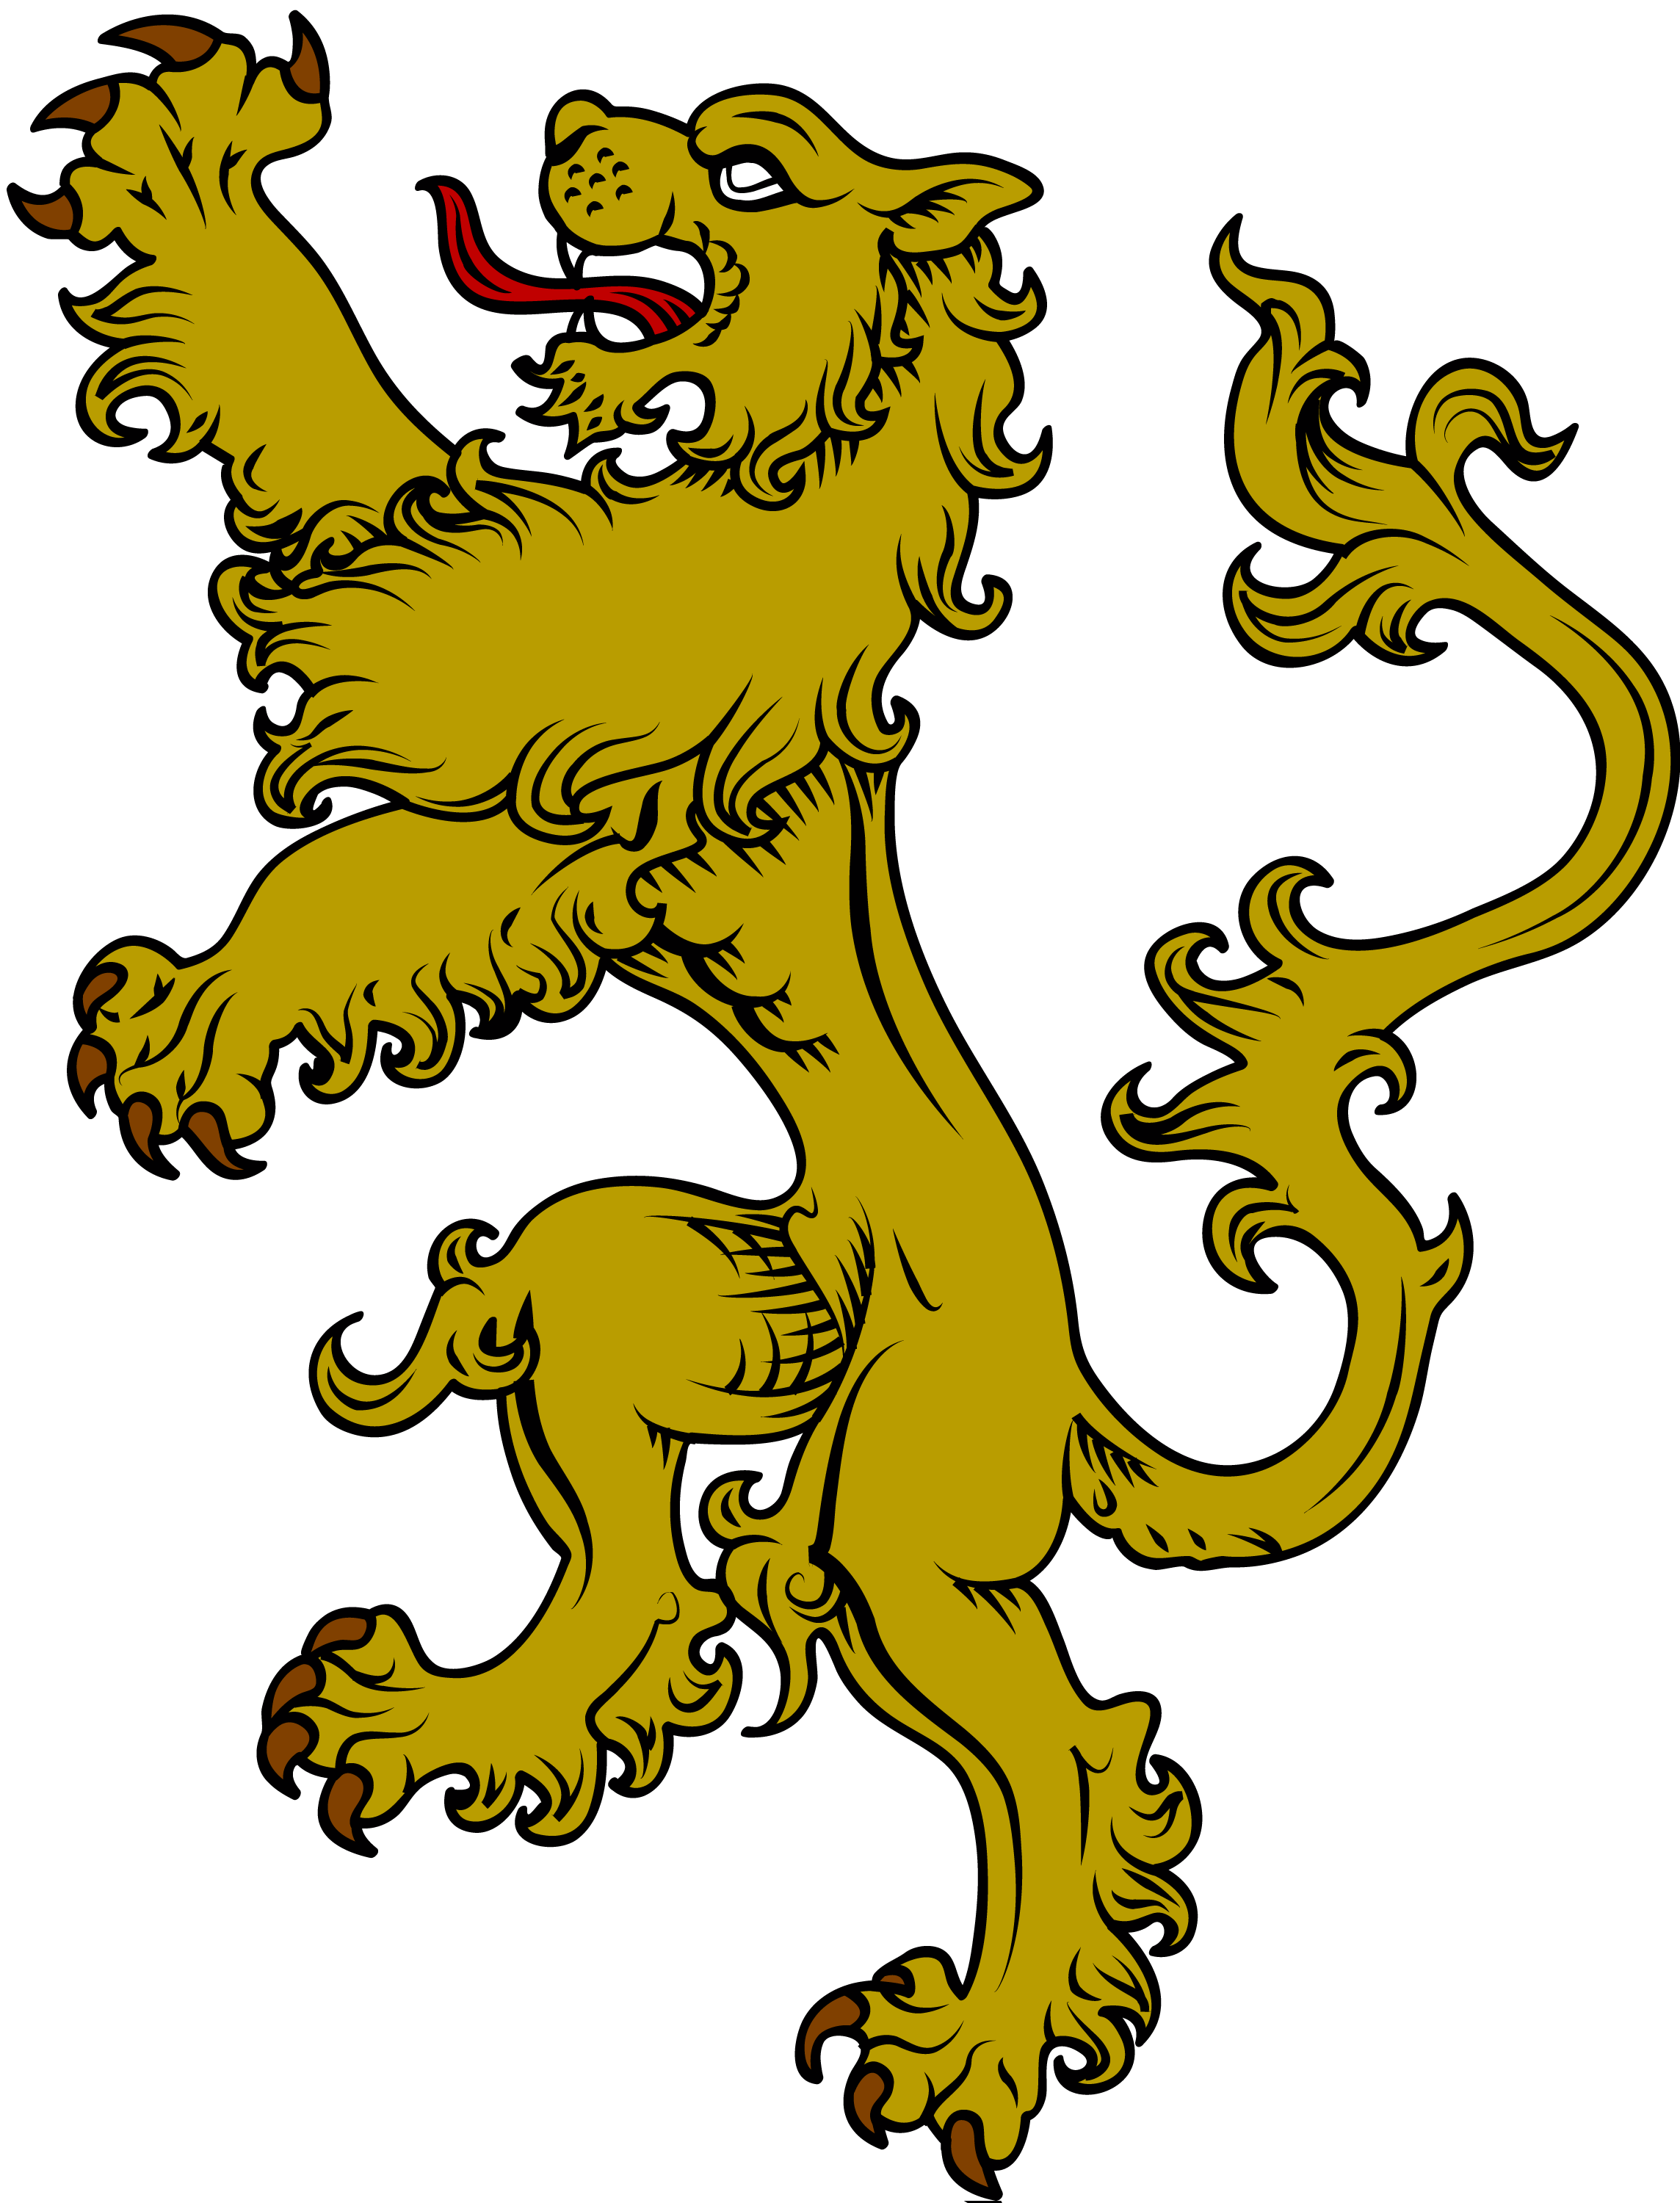 Lions clipart character. The symbol of a